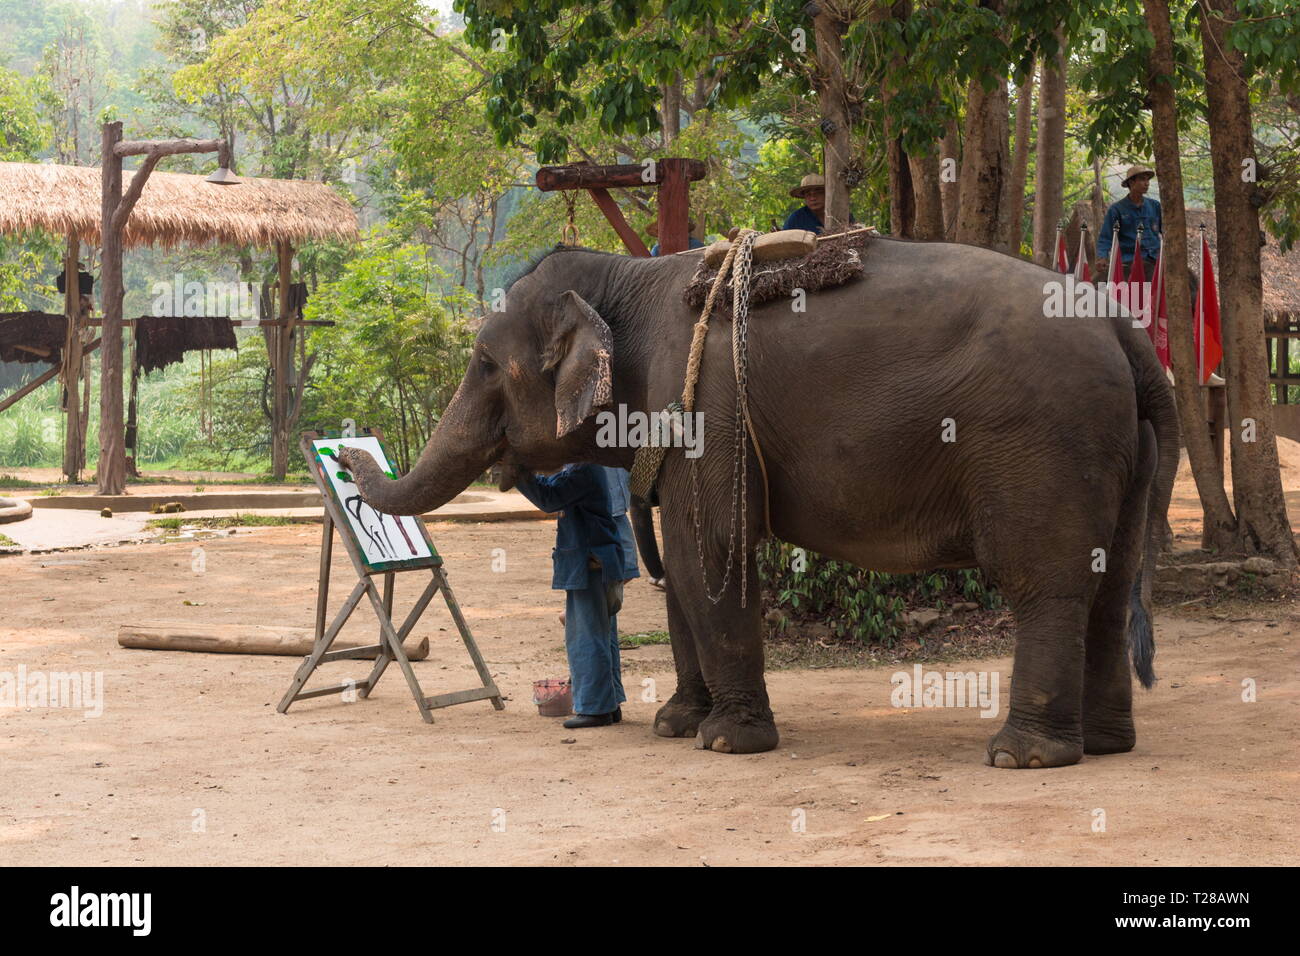 Lampang, Thailand - March 30, 2019: Elephant show at Thai Elephant Conservation Center in Lampang Province, Thailand. Stock Photo